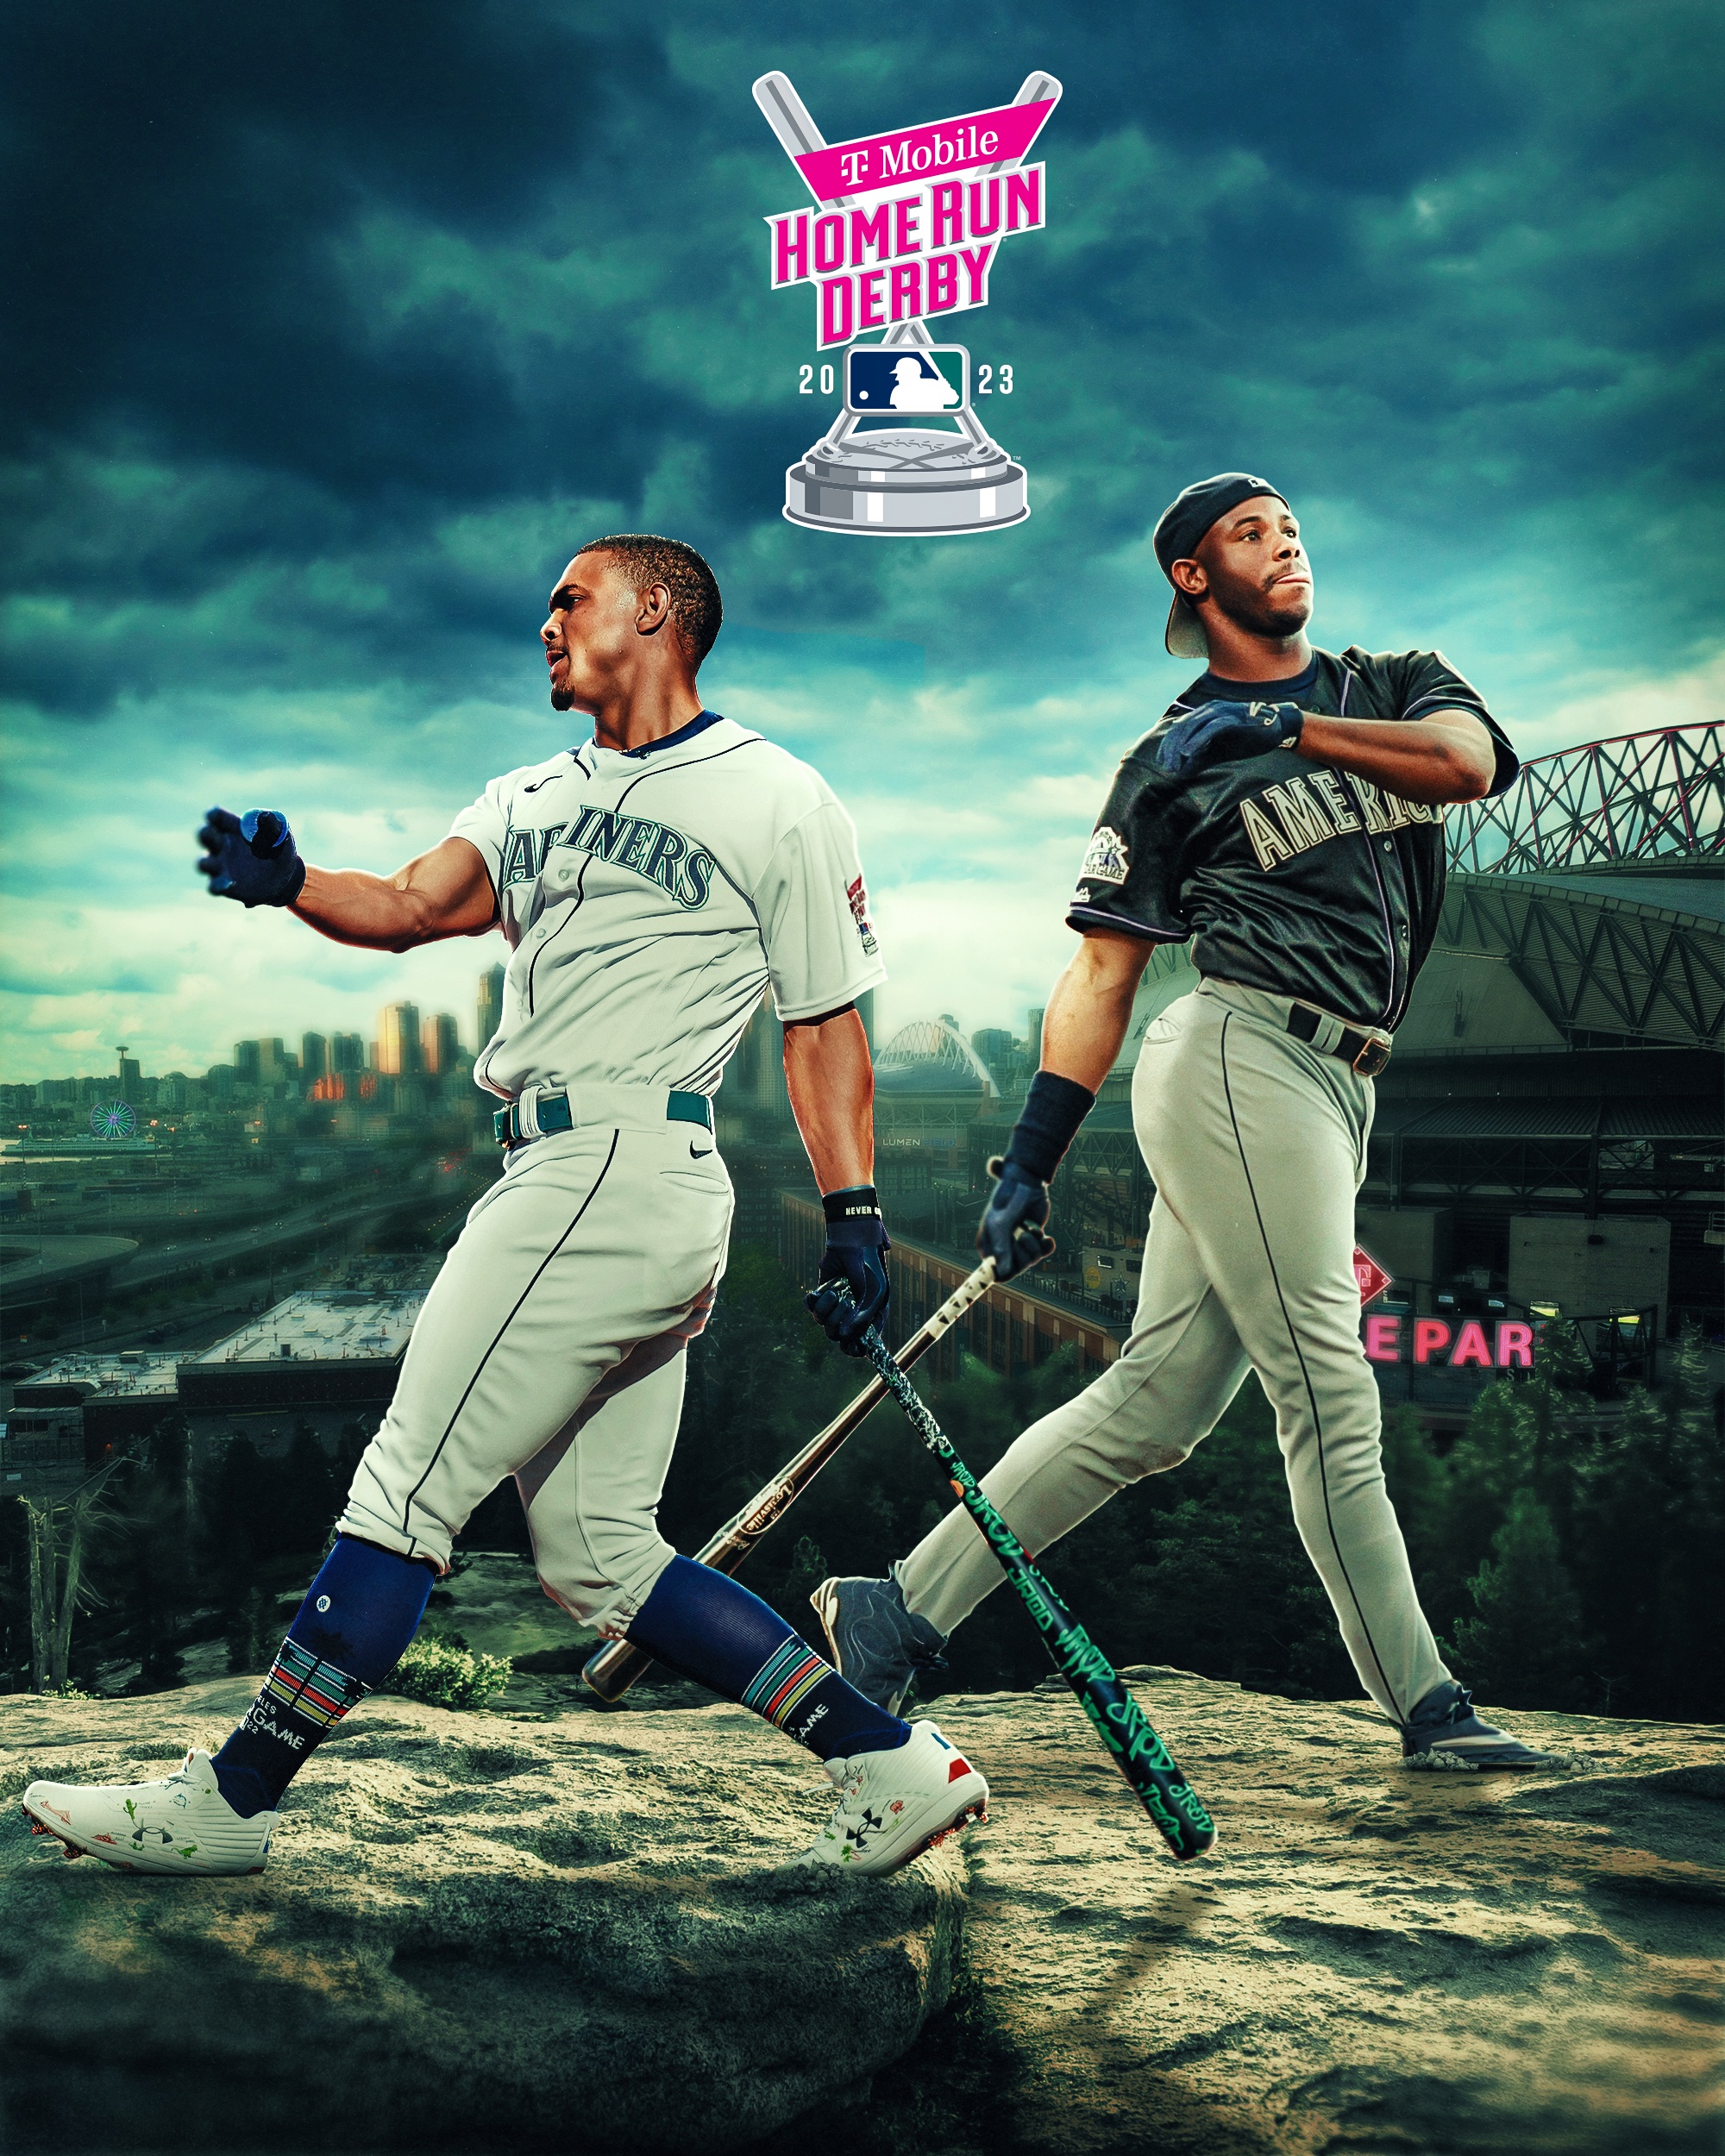 MLB on X: Will the hometown hero join Ken Griffey Jr. as the only  @Mariners player to win the @TMobile #HRDerby? Find out tonight at 8 pm ET  on @ESPN.  /